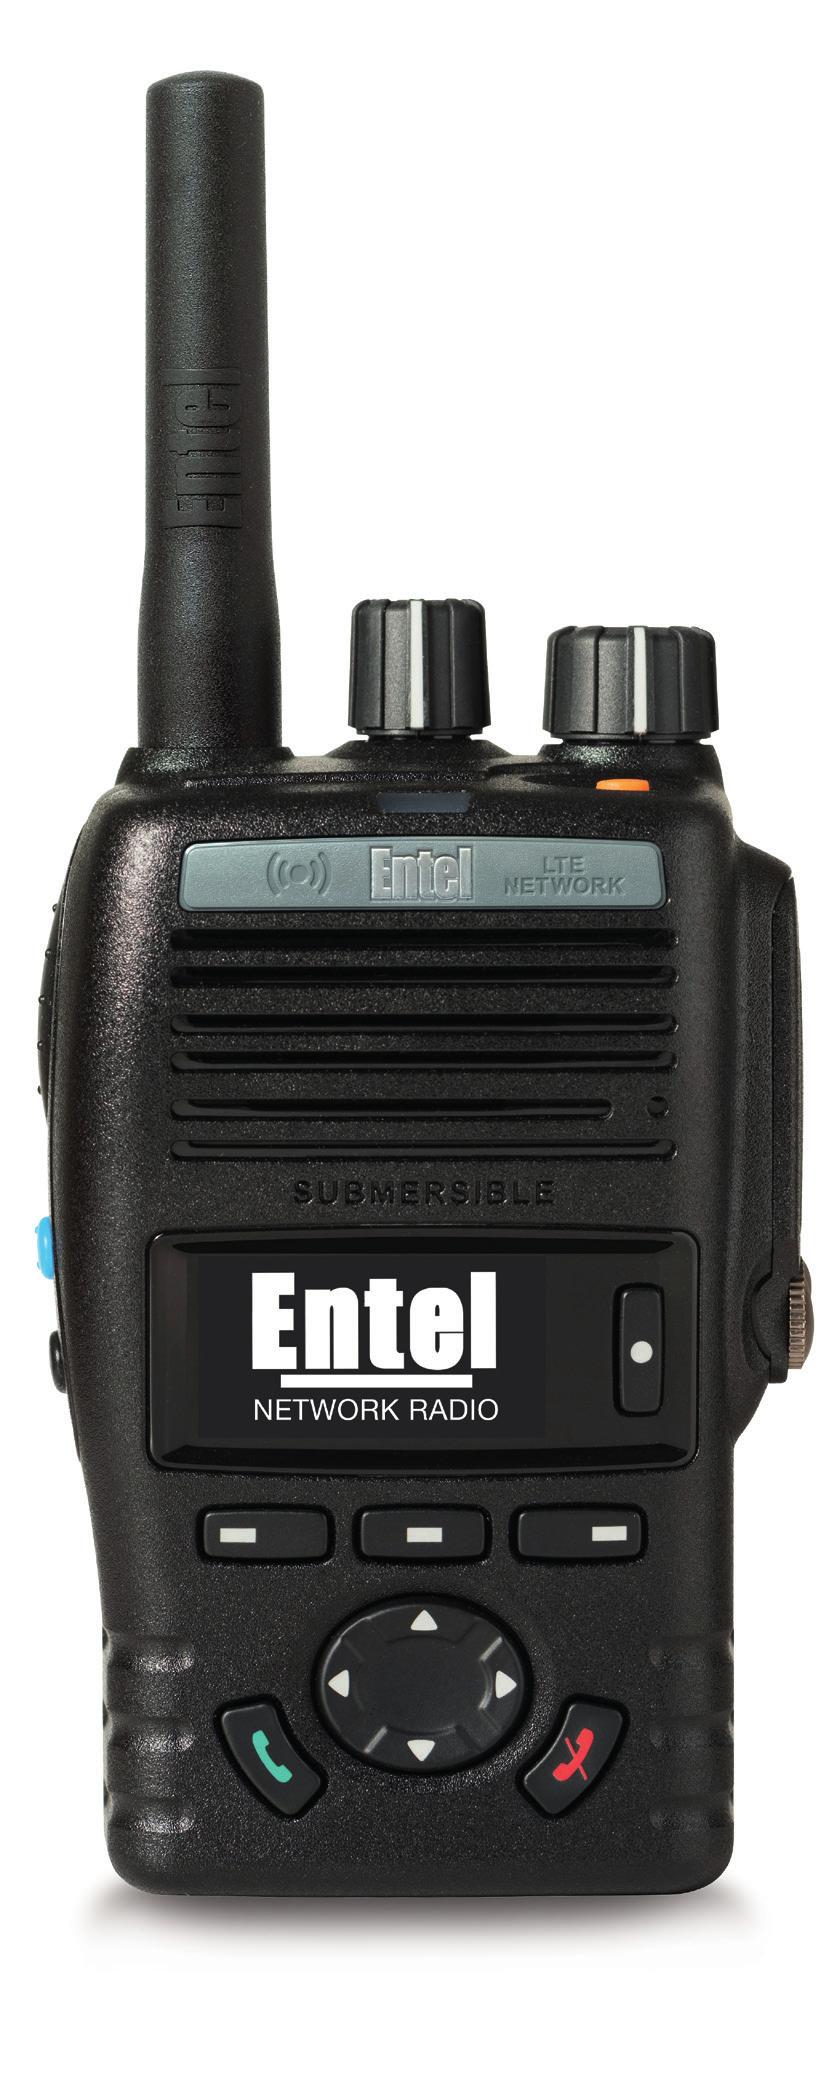 Business Critical Communications DN400 Series 4G LTE Wi-Fi PoC Radio MCX (Mission Critical Services) 상용